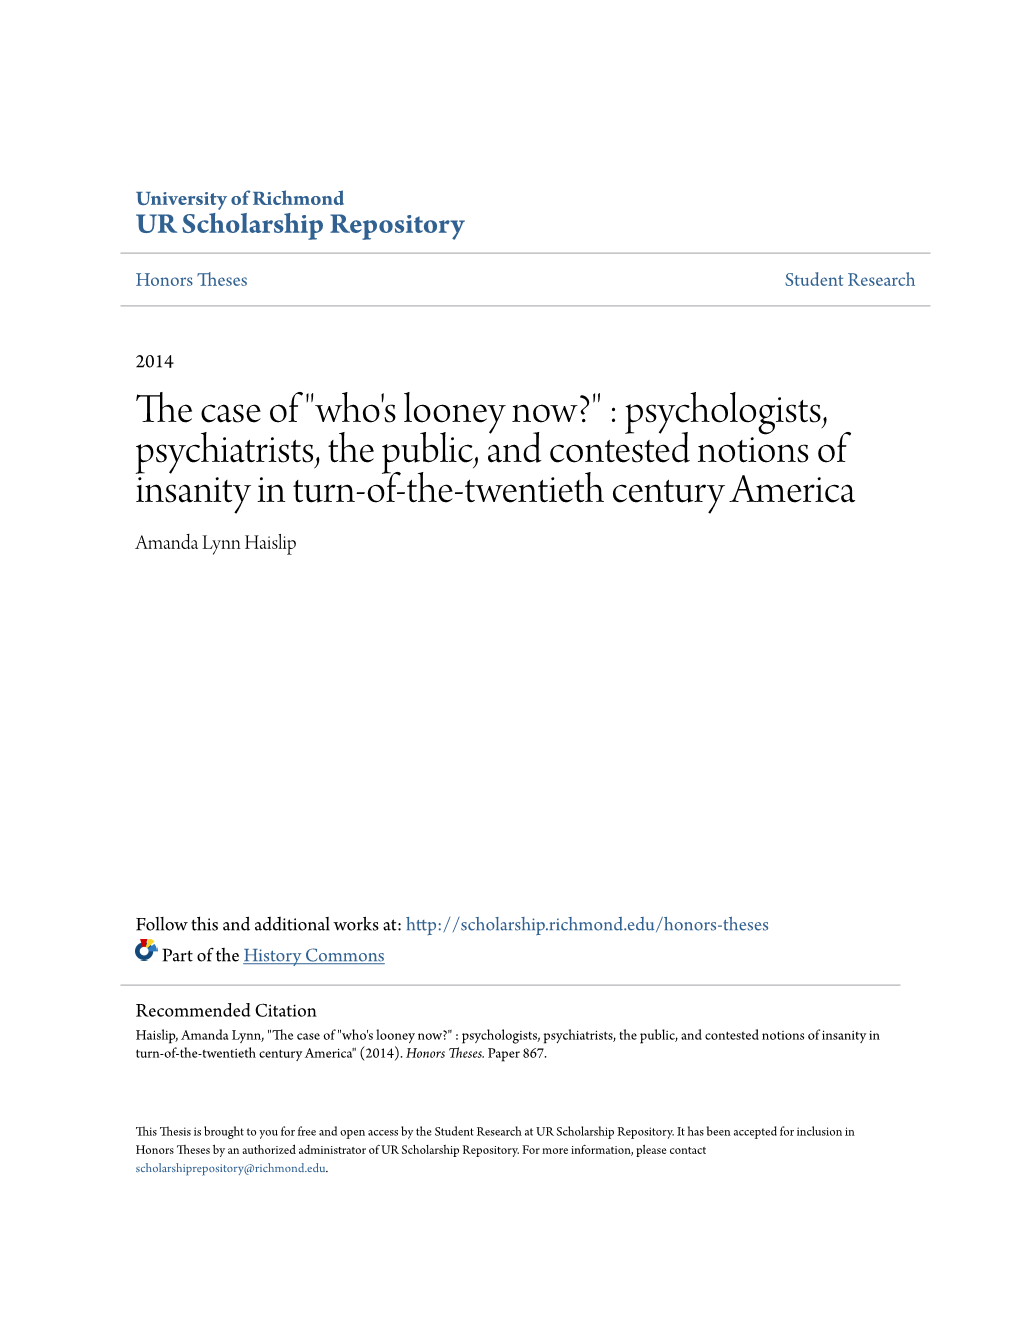 Who's Looney Now?" : Psychologists, Psychiatrists, the Public, and Contested Notions of Insanity in Turn-Of-The-Twentieth Century America Amanda Lynn Haislip